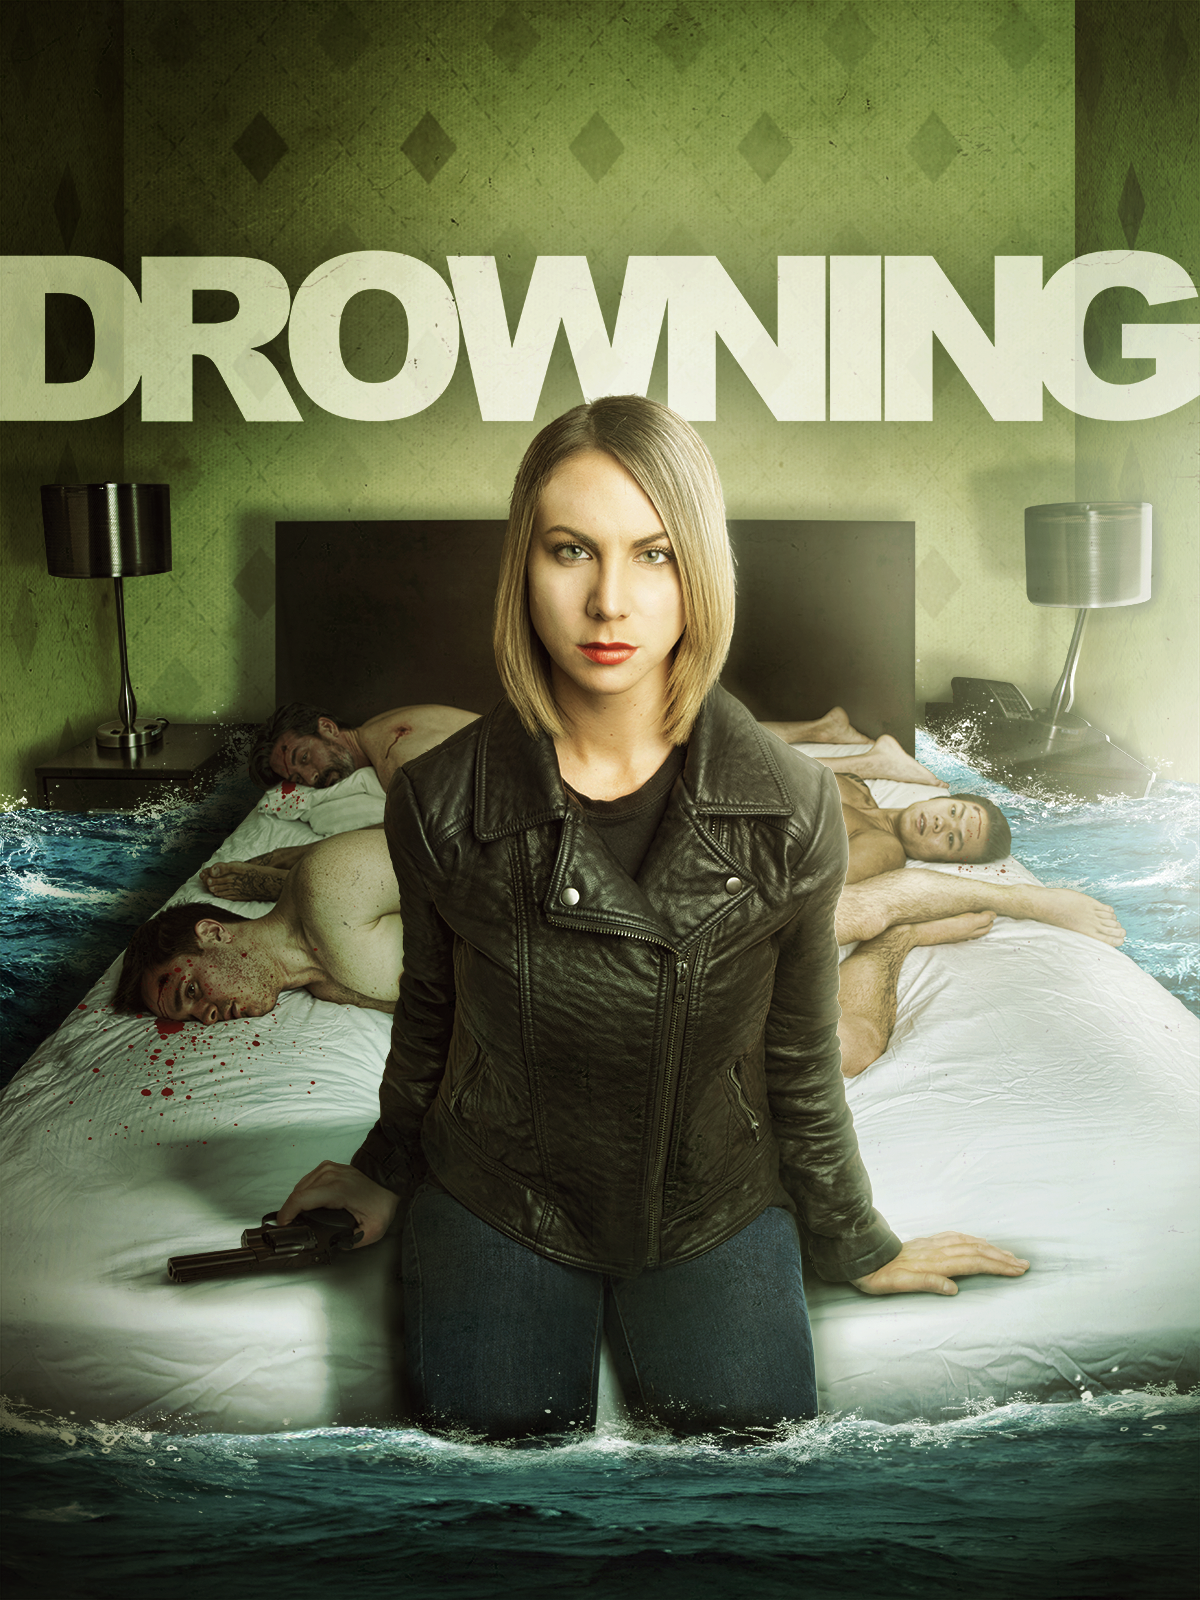 Watch Drowning on Amazon Prime thumbnail